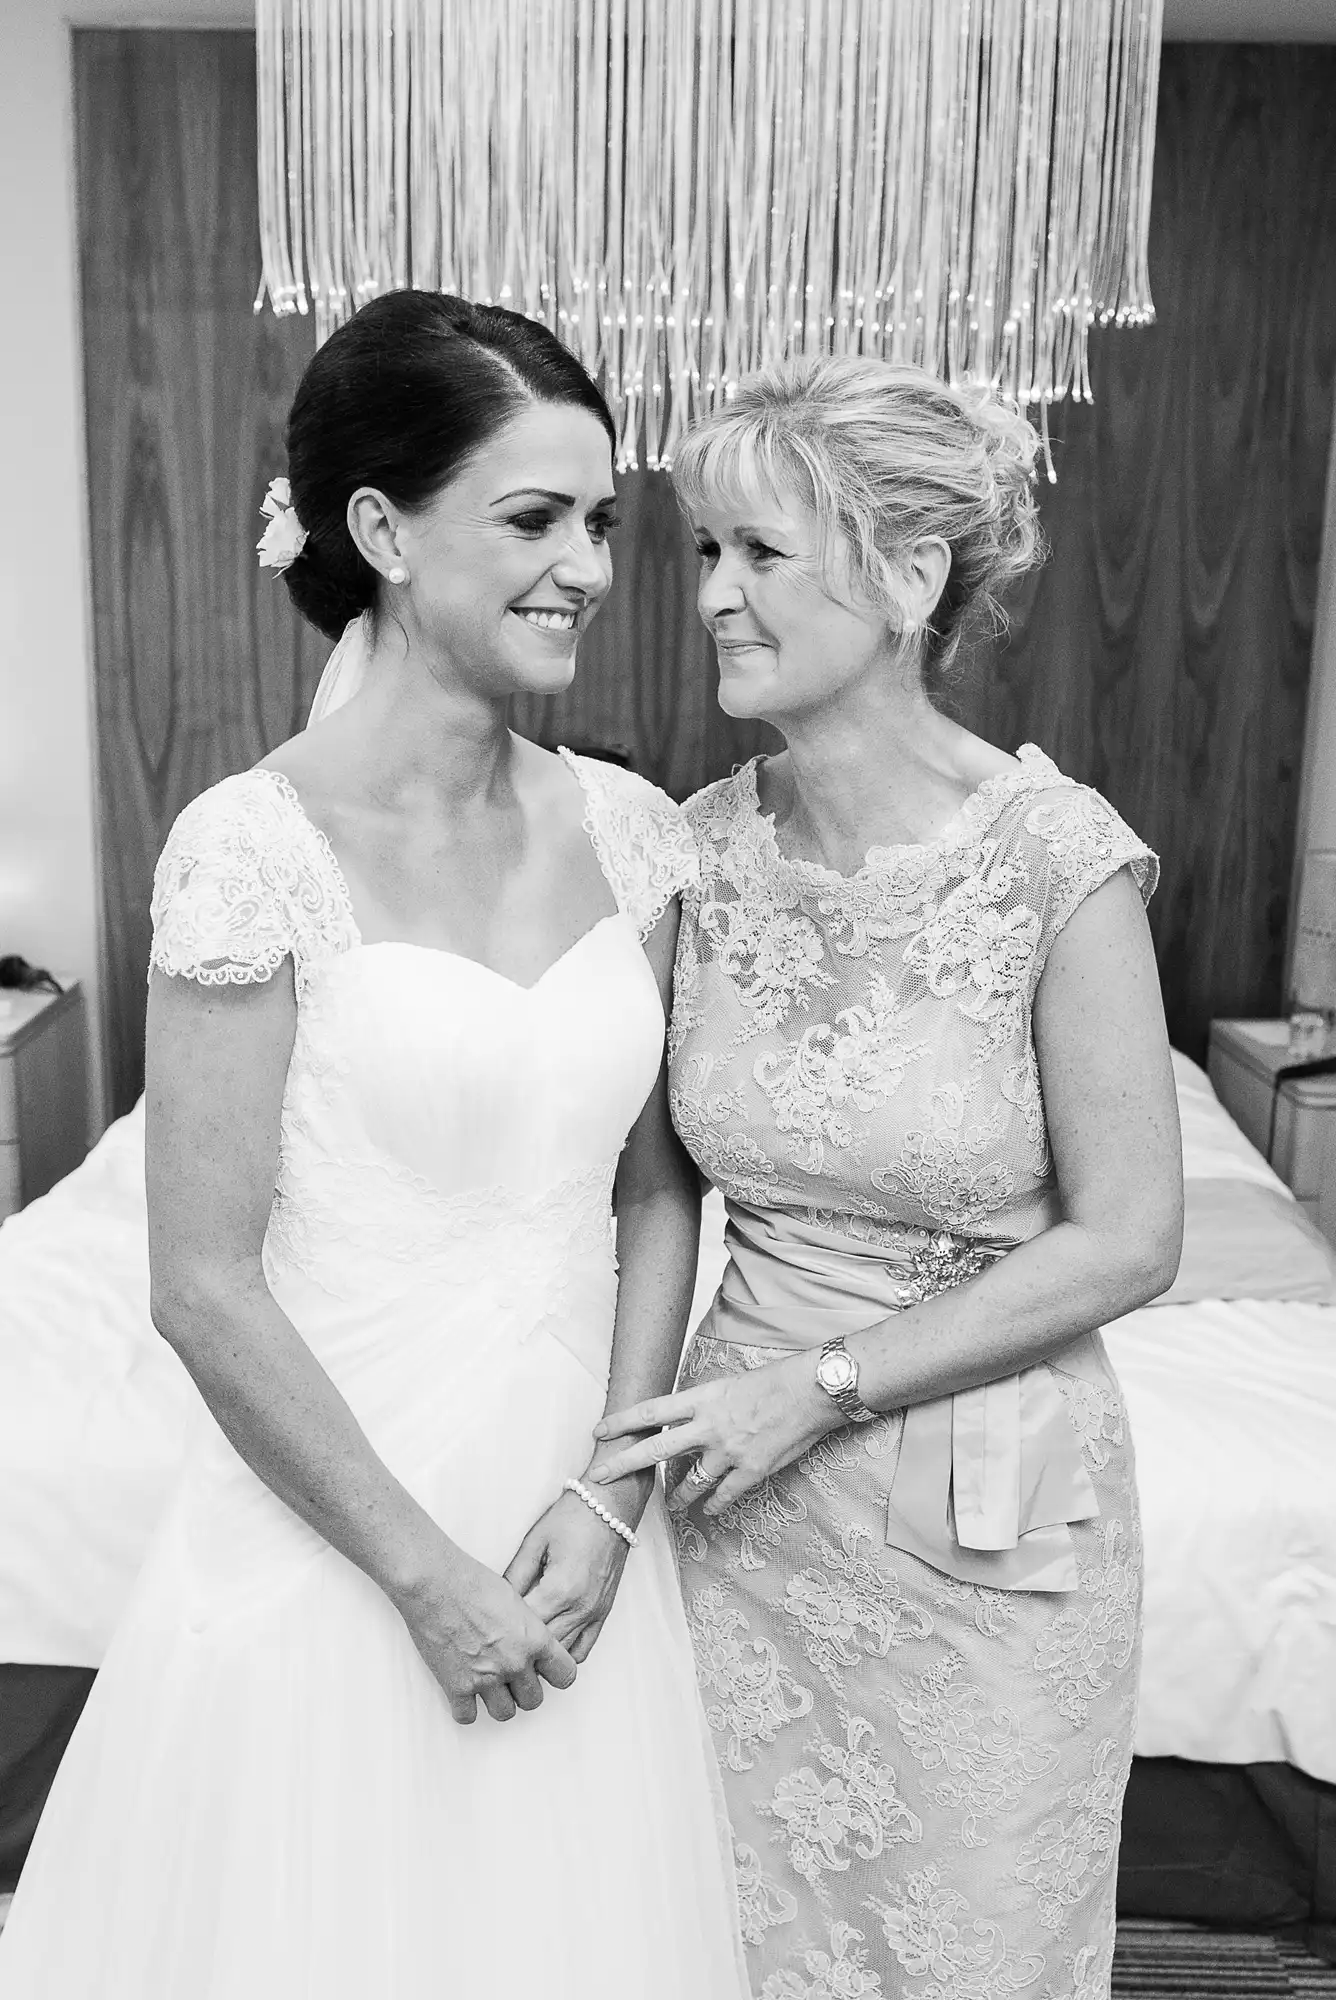 A black and white photo of a bride in a lace dress smiling at an older woman in a lace dress, possibly her mother, as they hold hands.